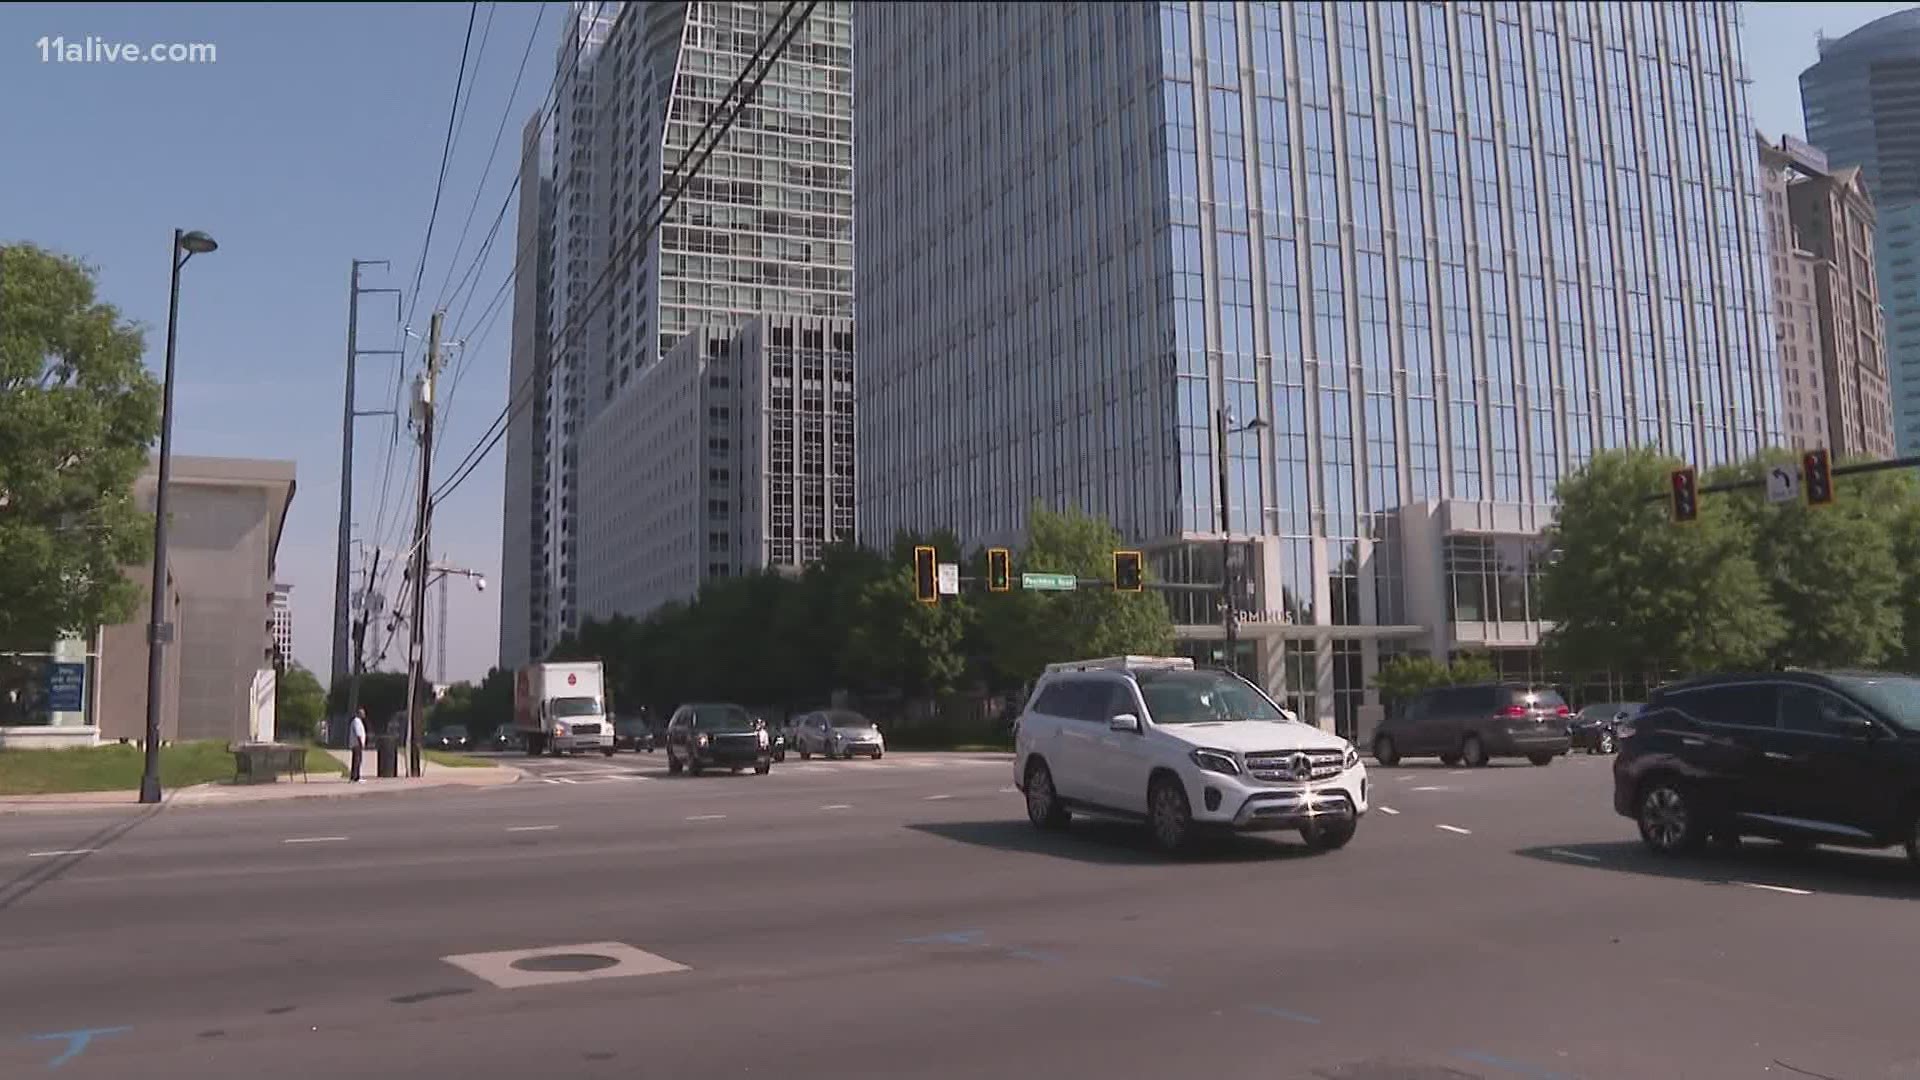 The rise in Crime in Atlanta is the primary reason a Buckhead group wants to separate from the city.